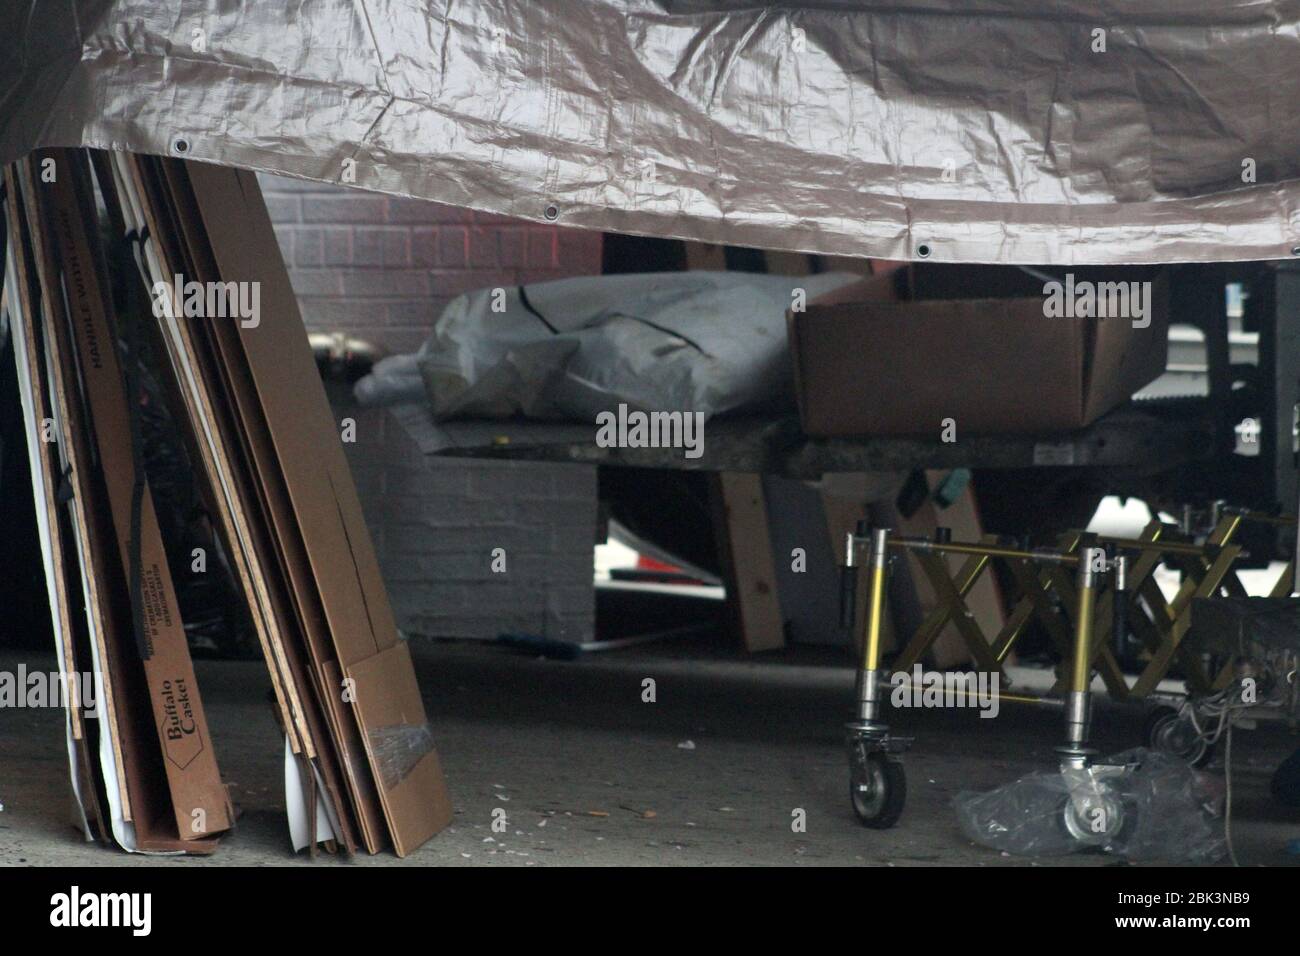 April 30, 2020, New York, New York, USA: A stained white bag containing a body have been placed on the hoist of a refrigerated truck, about to be removed from the Andrew T. Cleckley Funeral Home in Brooklyn. Cardboard coffins and a stretcher are next to it. 60 bodies were stored in 4 non-refregerated vehiciles lining the street nearby stores. Neighbors reported a foul smell still persistent and fluids dripping from the trucks. Some remains were also found lying on the facilityÃ¢â‚¬â„¢s floor. The funeral home was overwhelmed by COVID-19 deaths in New York. (Credit Image: © Marie Le Ble/ZUMA Wi Stock Photo